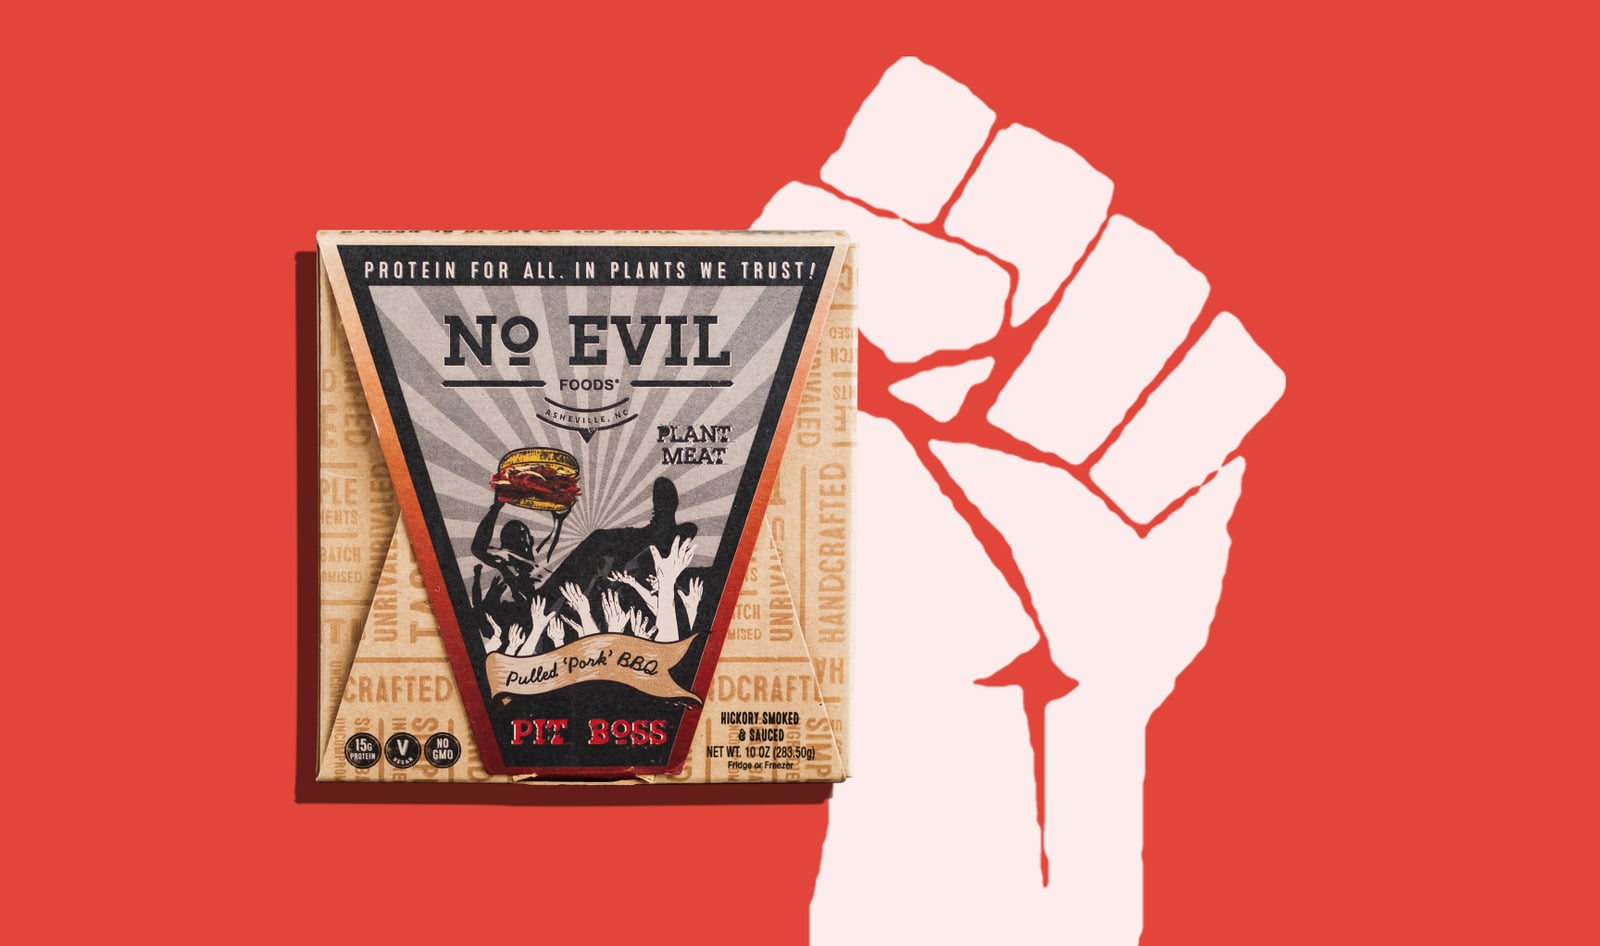 VegNews Exclusive: The Story Behind No Evil Foods and Its Major Labor Controversy